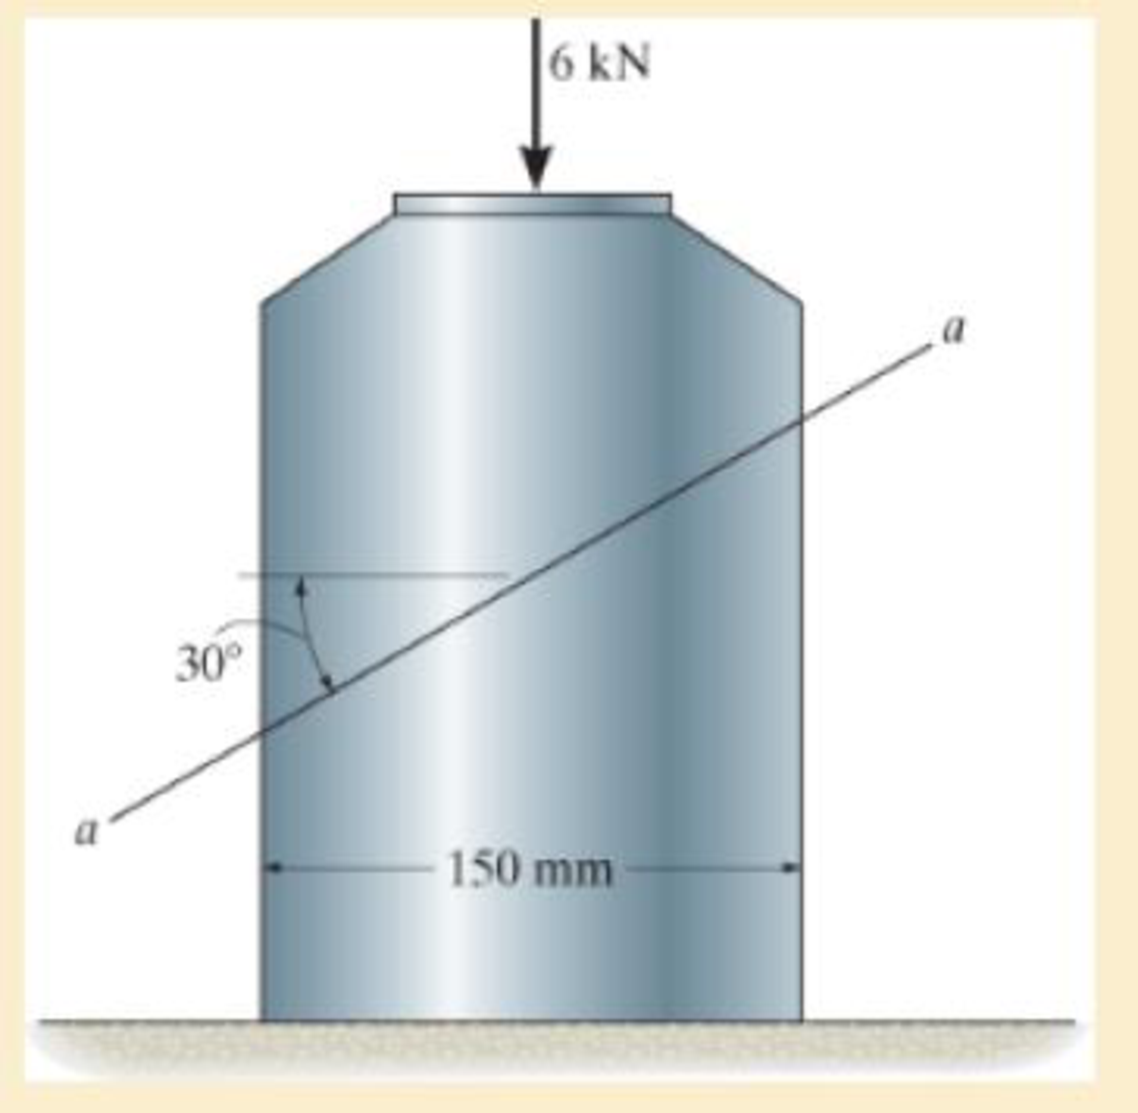 Chapter 1, Problem 6RP, The 150 mm by 150 mm block of aluminum supports a compressive load of 6 kN. Determine the average 